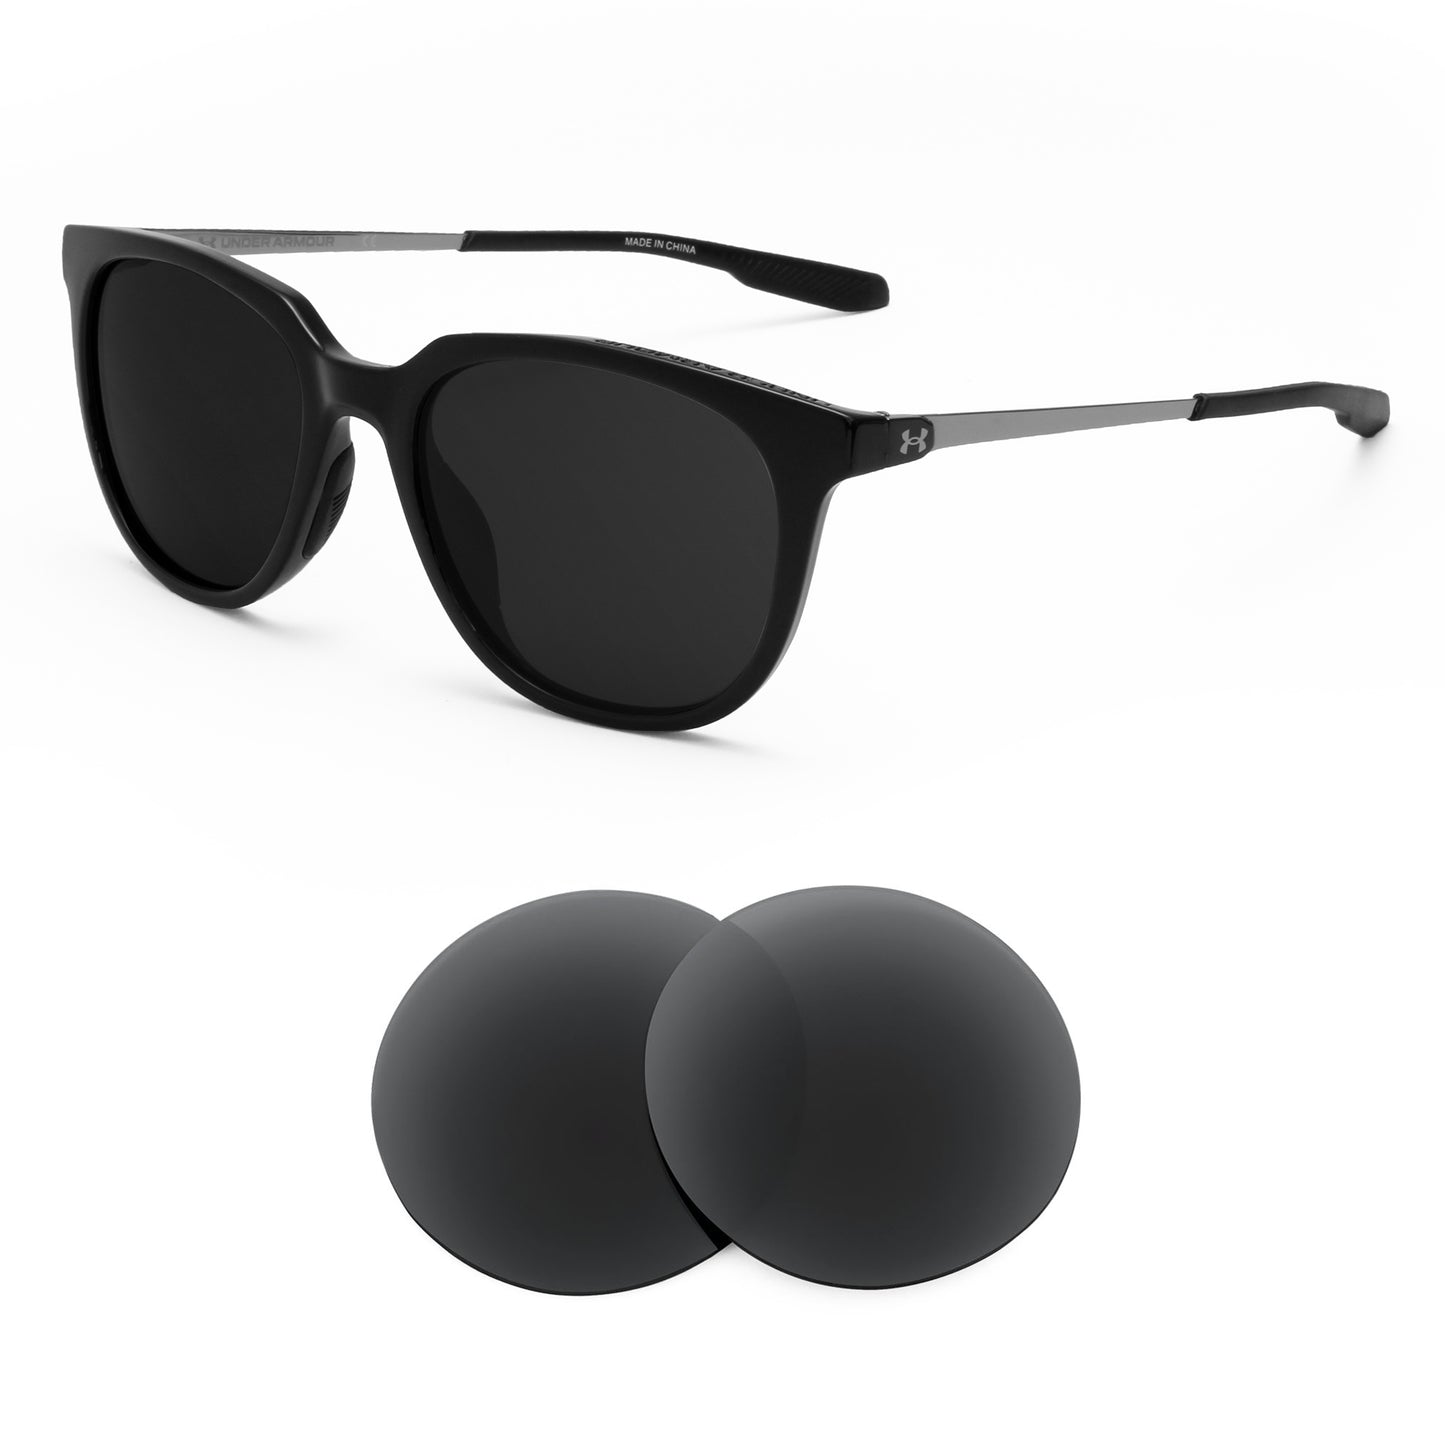 Under Armour Circuit sunglasses with replacement lenses